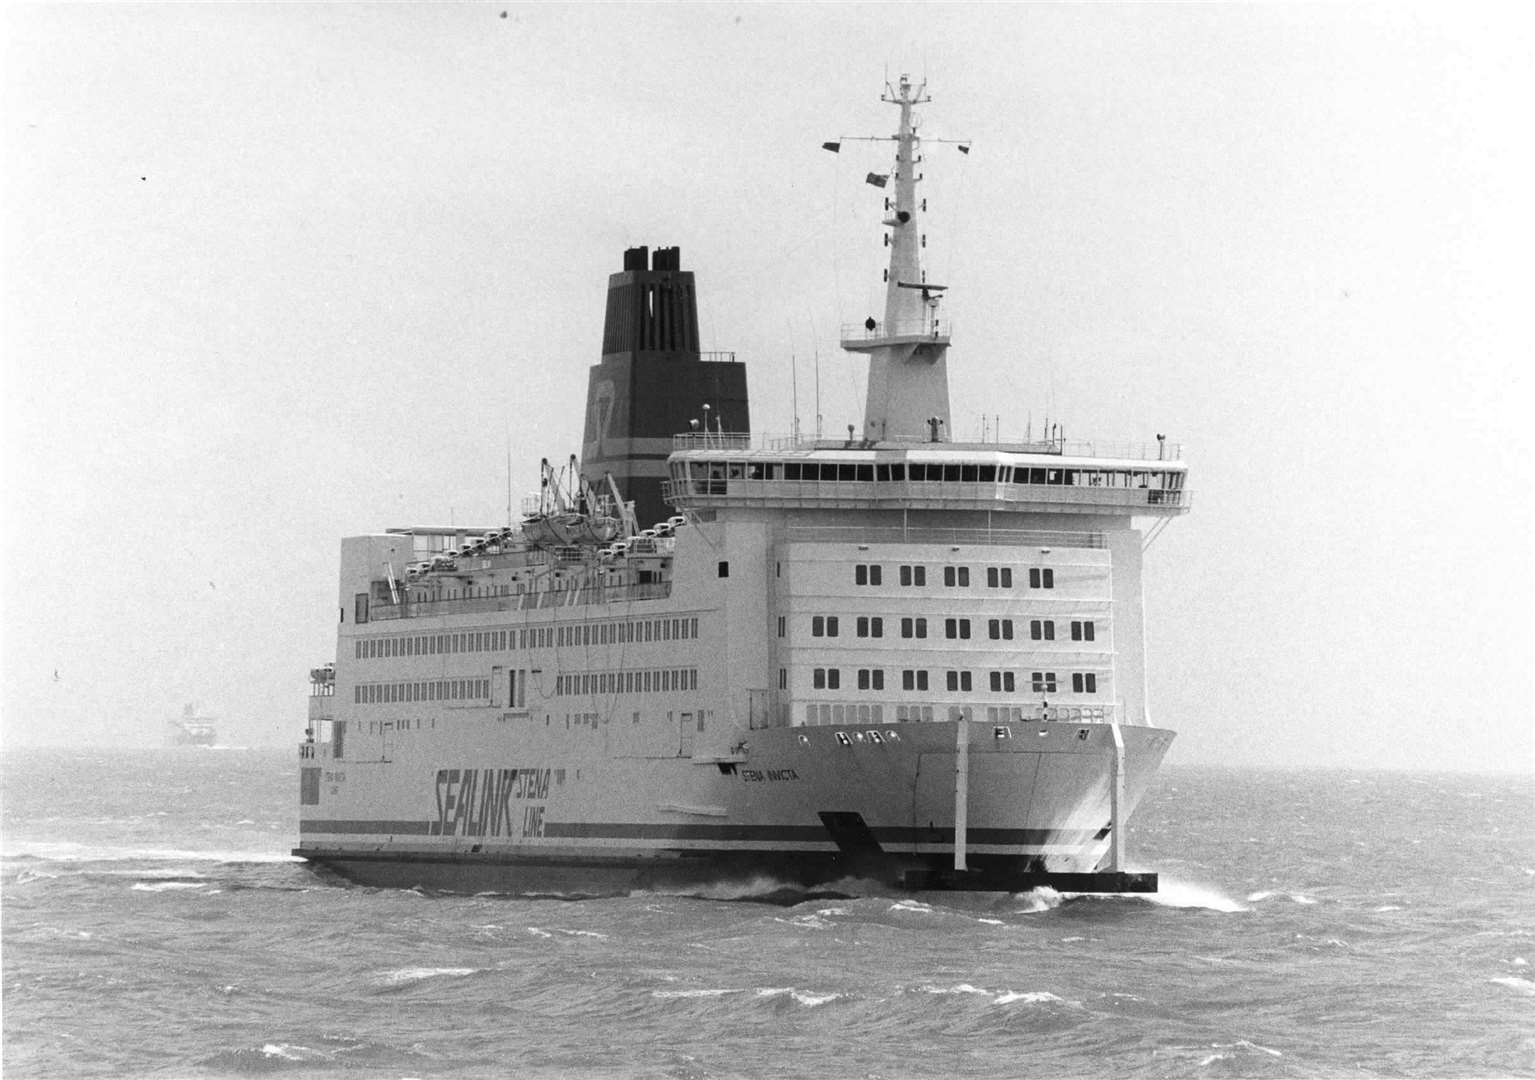 A Sealink ferry, in 1991. The firm once served both Calais and Boulogne